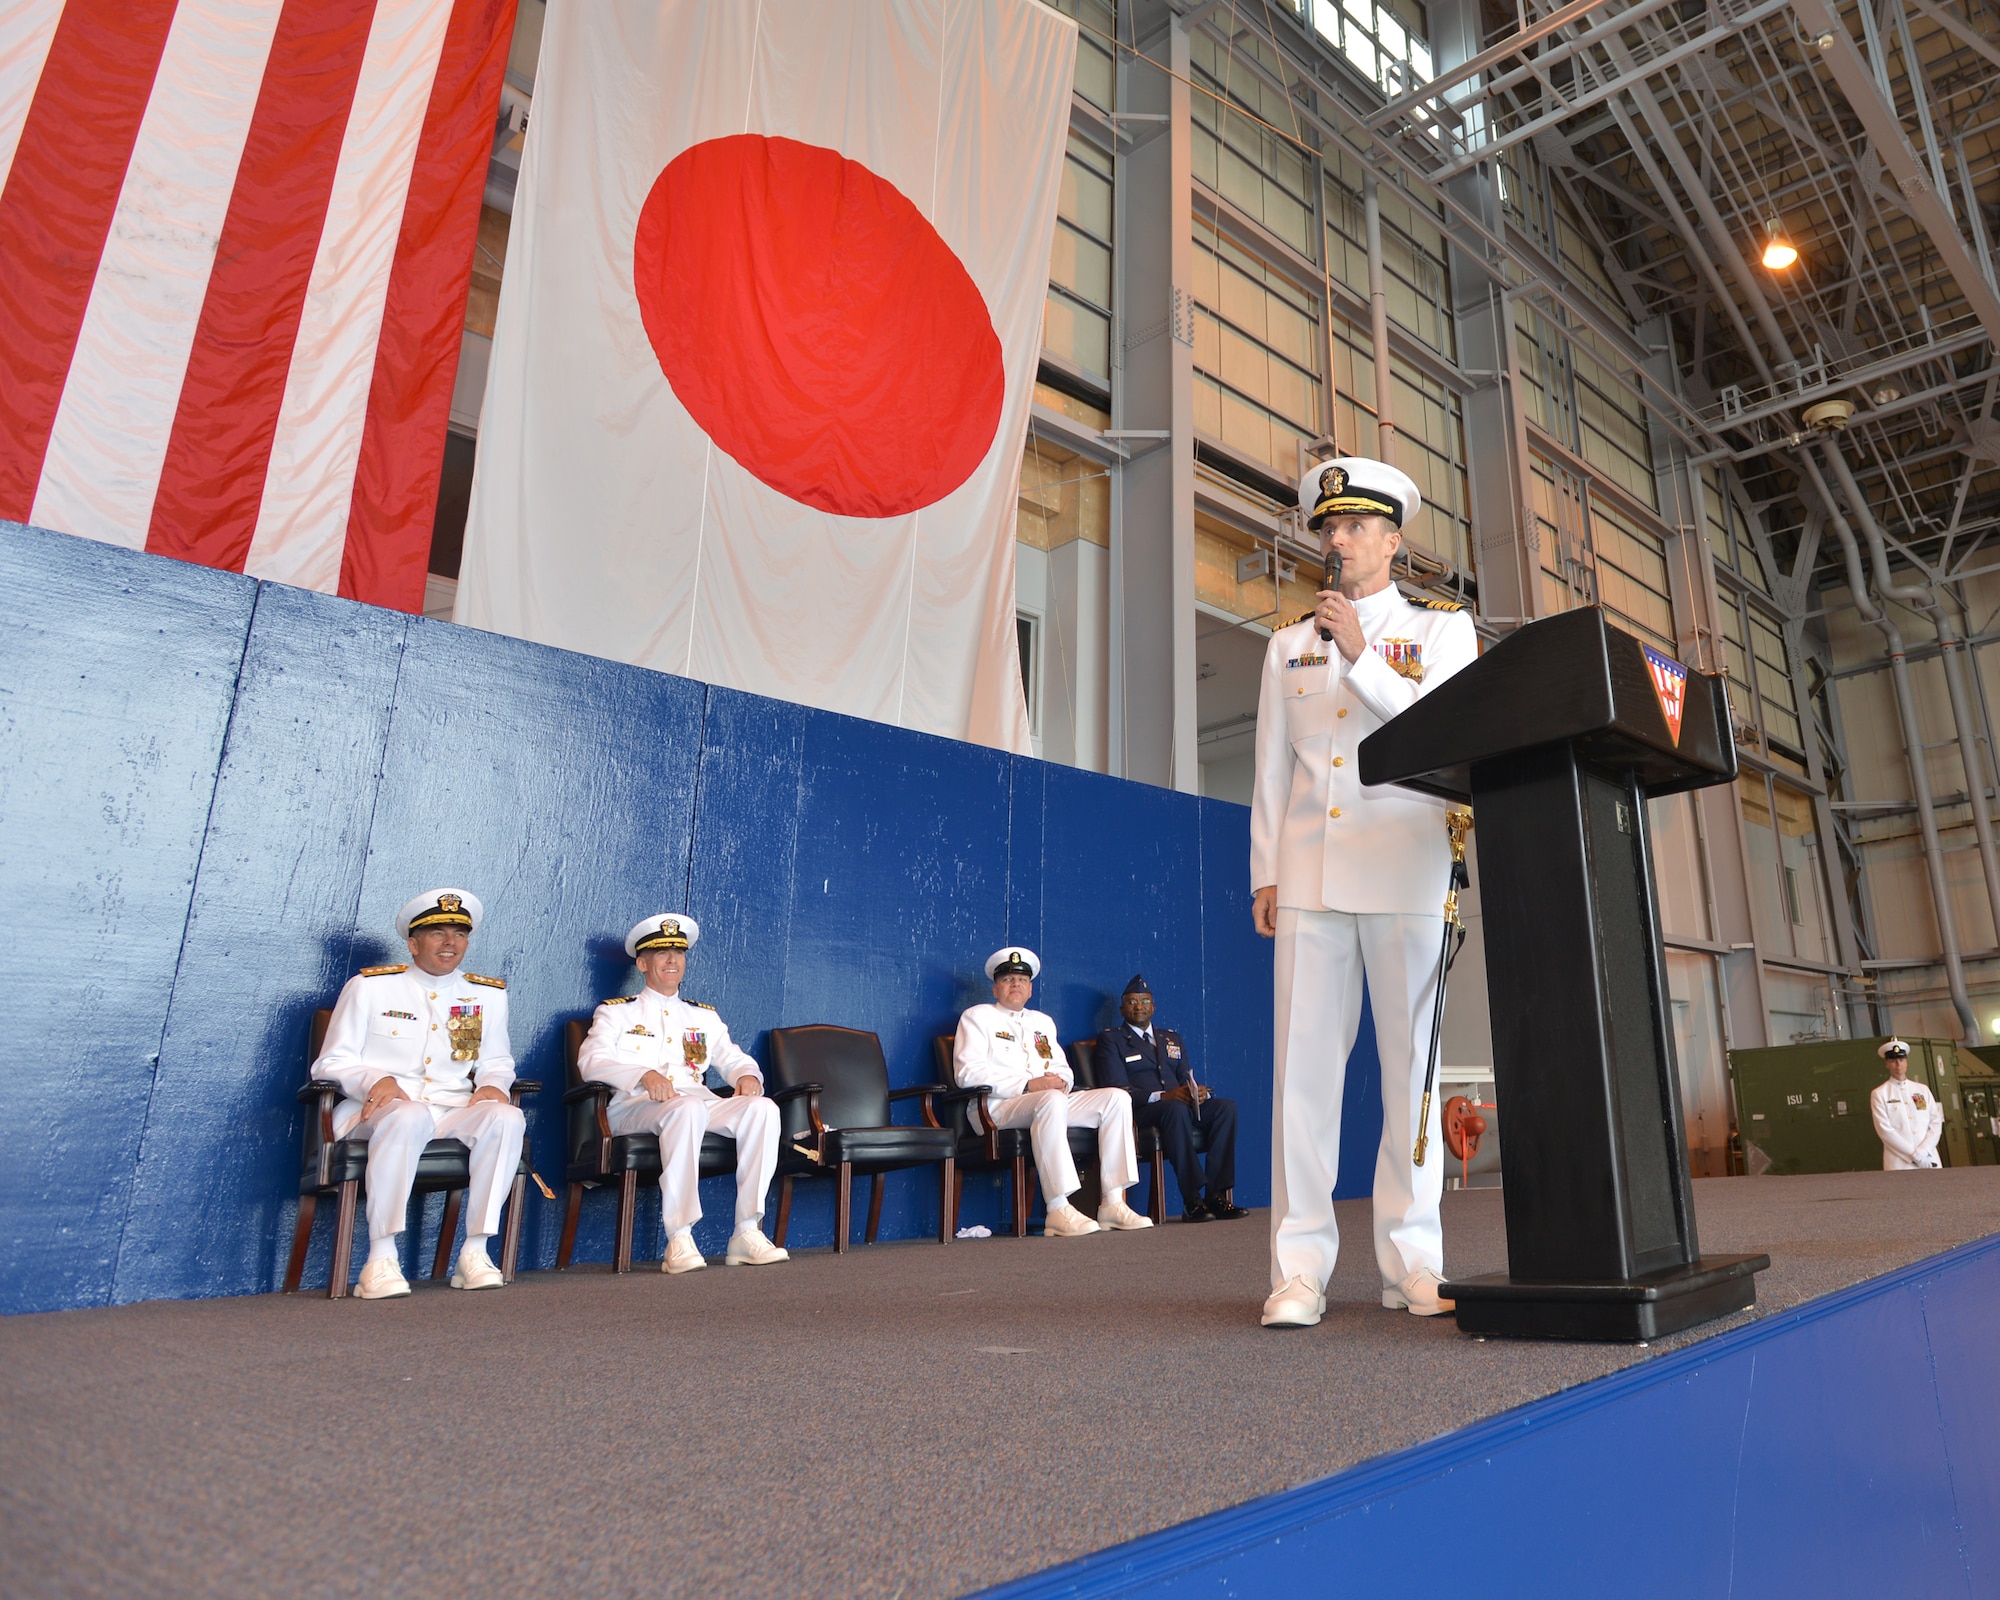 Capt. Keith Henry, originally from Cheshire, Connecticut, addresses the audience after taking command of Naval Air Facility (NAF) Misawa during a change of command ceremony, June 20, 0214.  Henry assumed command of NAF Misawa from Capt. Chris Rodeman, becoming the 18th commanding officer in the installation’s history. NAF Misawa is a U.S. naval base located in northern Japan. (U.S. Navy photo by Mass Communication Specialist 3rd Class Erin Devenberg/Released)